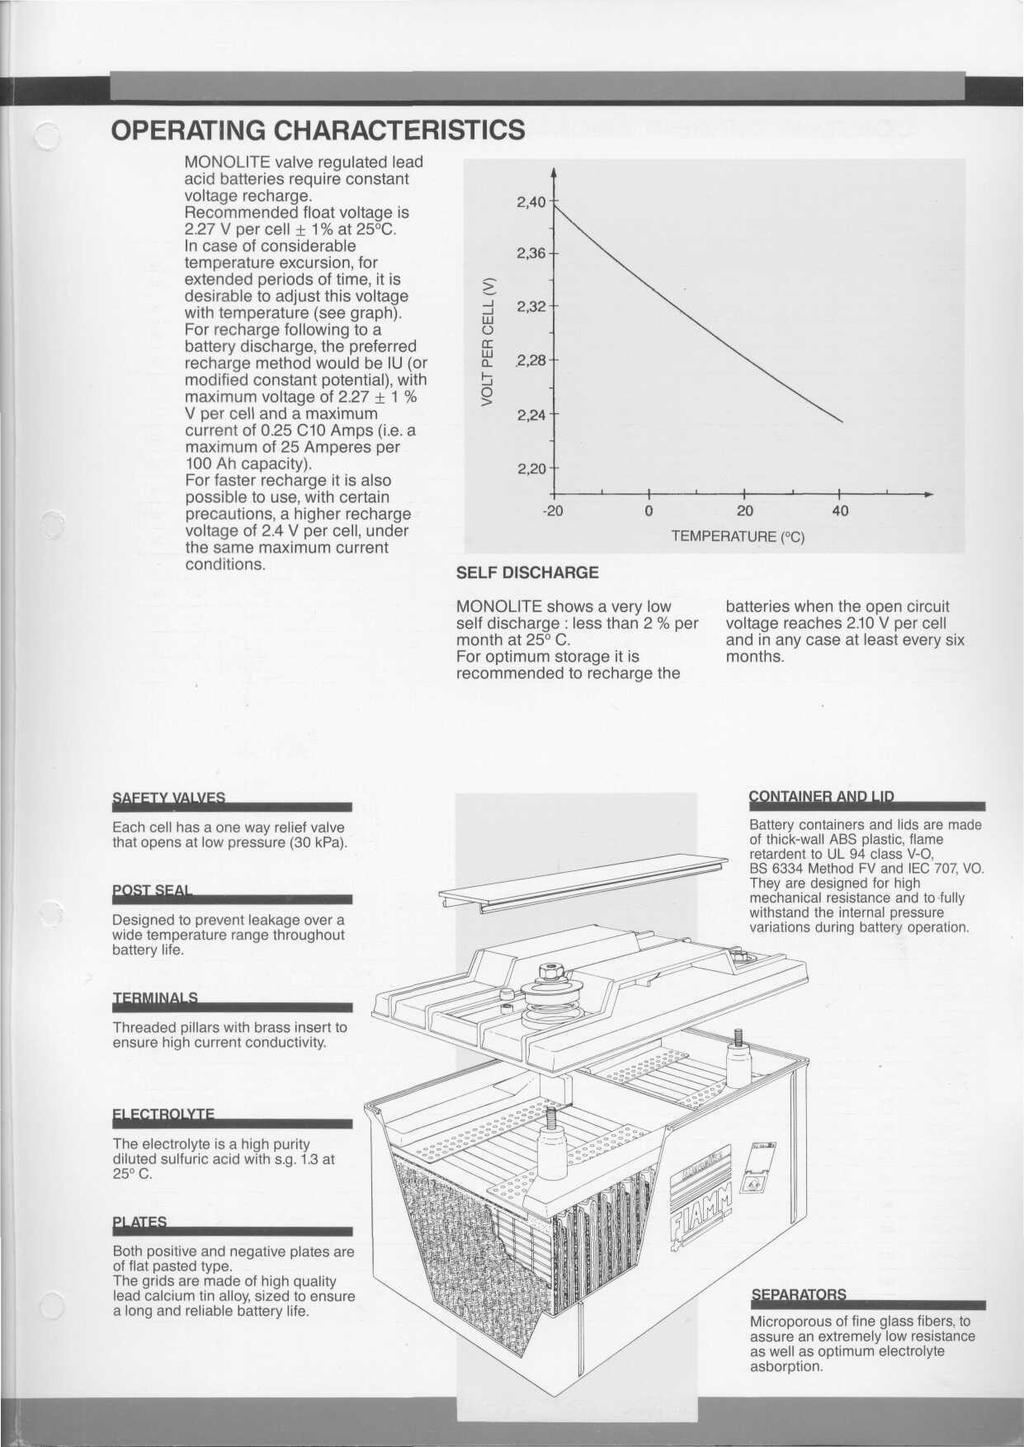 OPERATING CHARACTERISTICS MONOLITE valve regulated lead acid batteries require constant voltage recharge. Recommended float voltage is 2.27 V per cell + 1%at25 C.